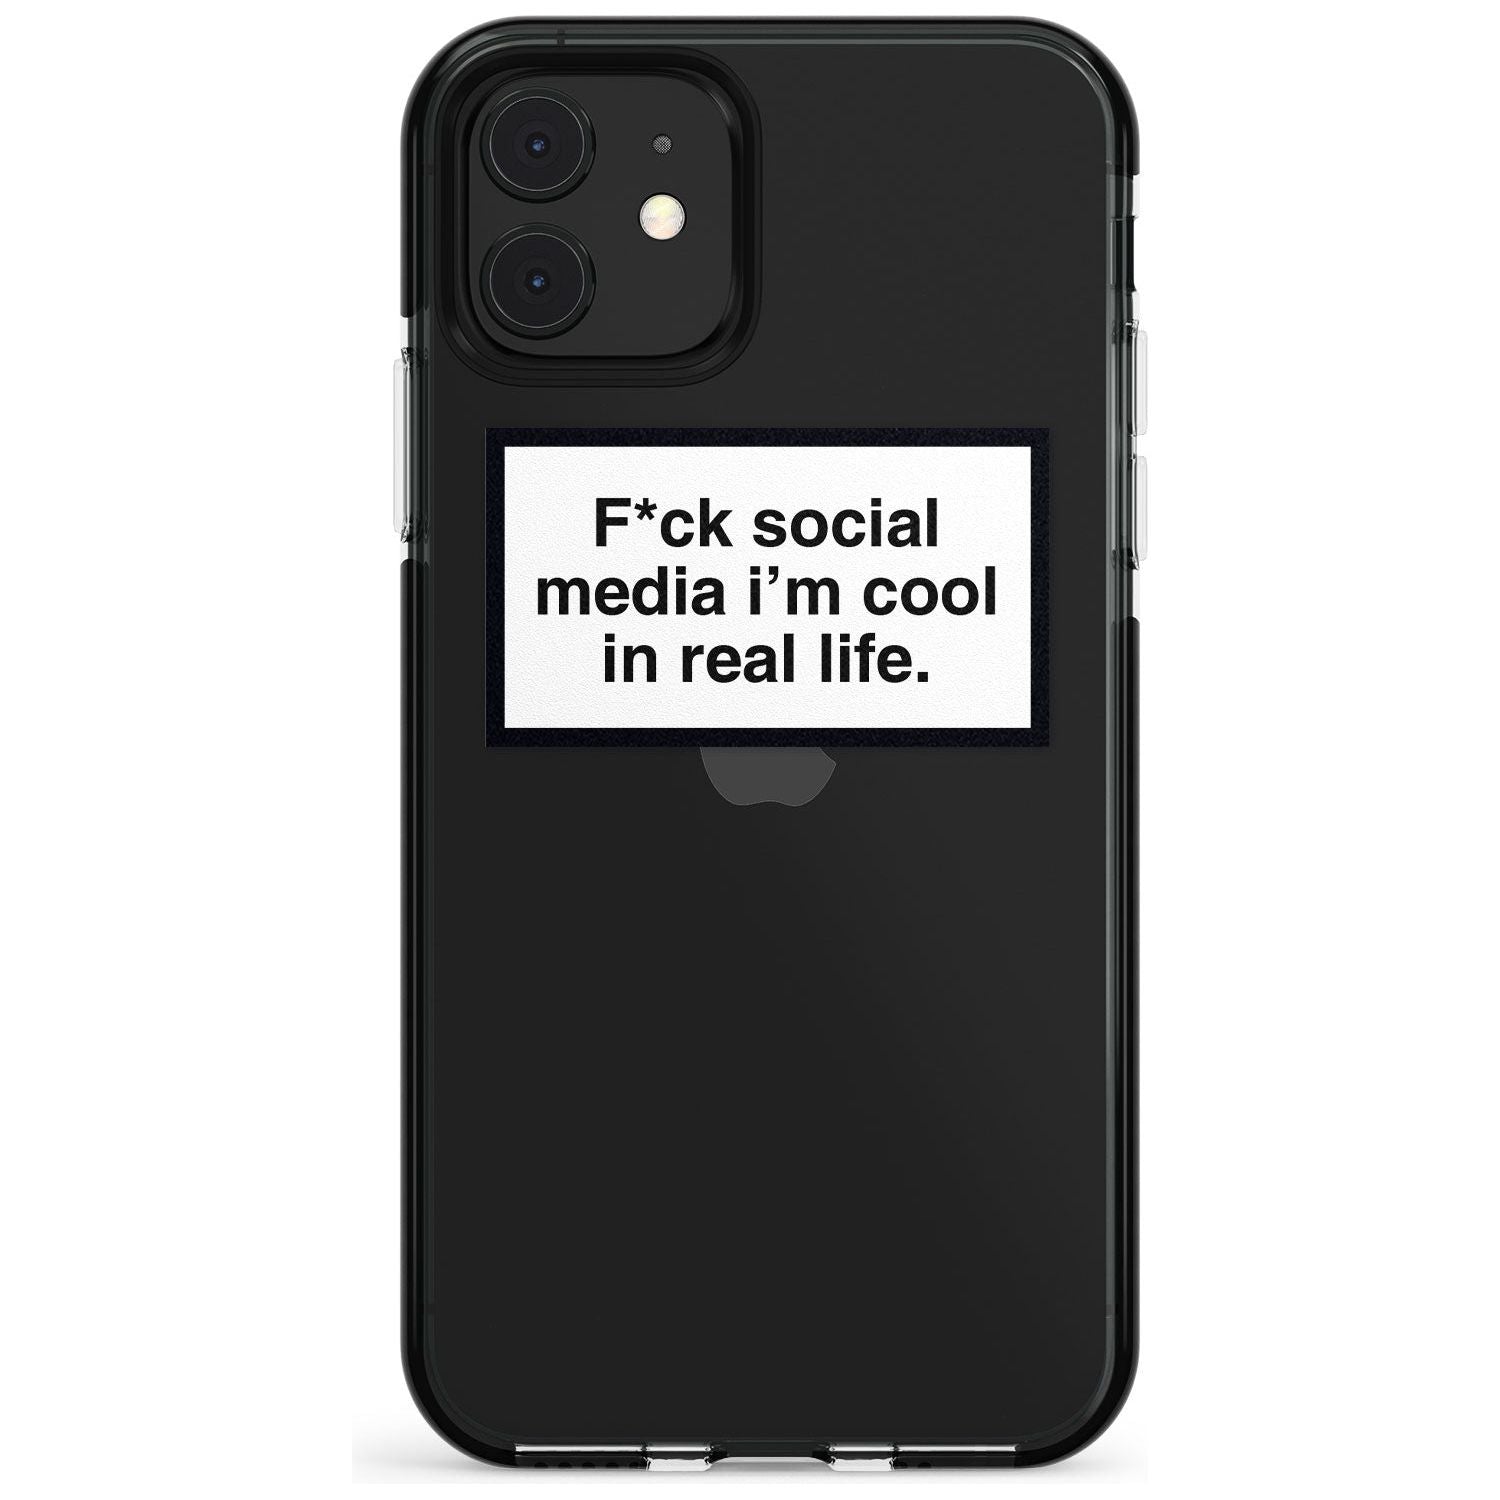 F*ck social media I'm cool in real life Pink Fade Impact Phone Case for iPhone 11 Pro Max